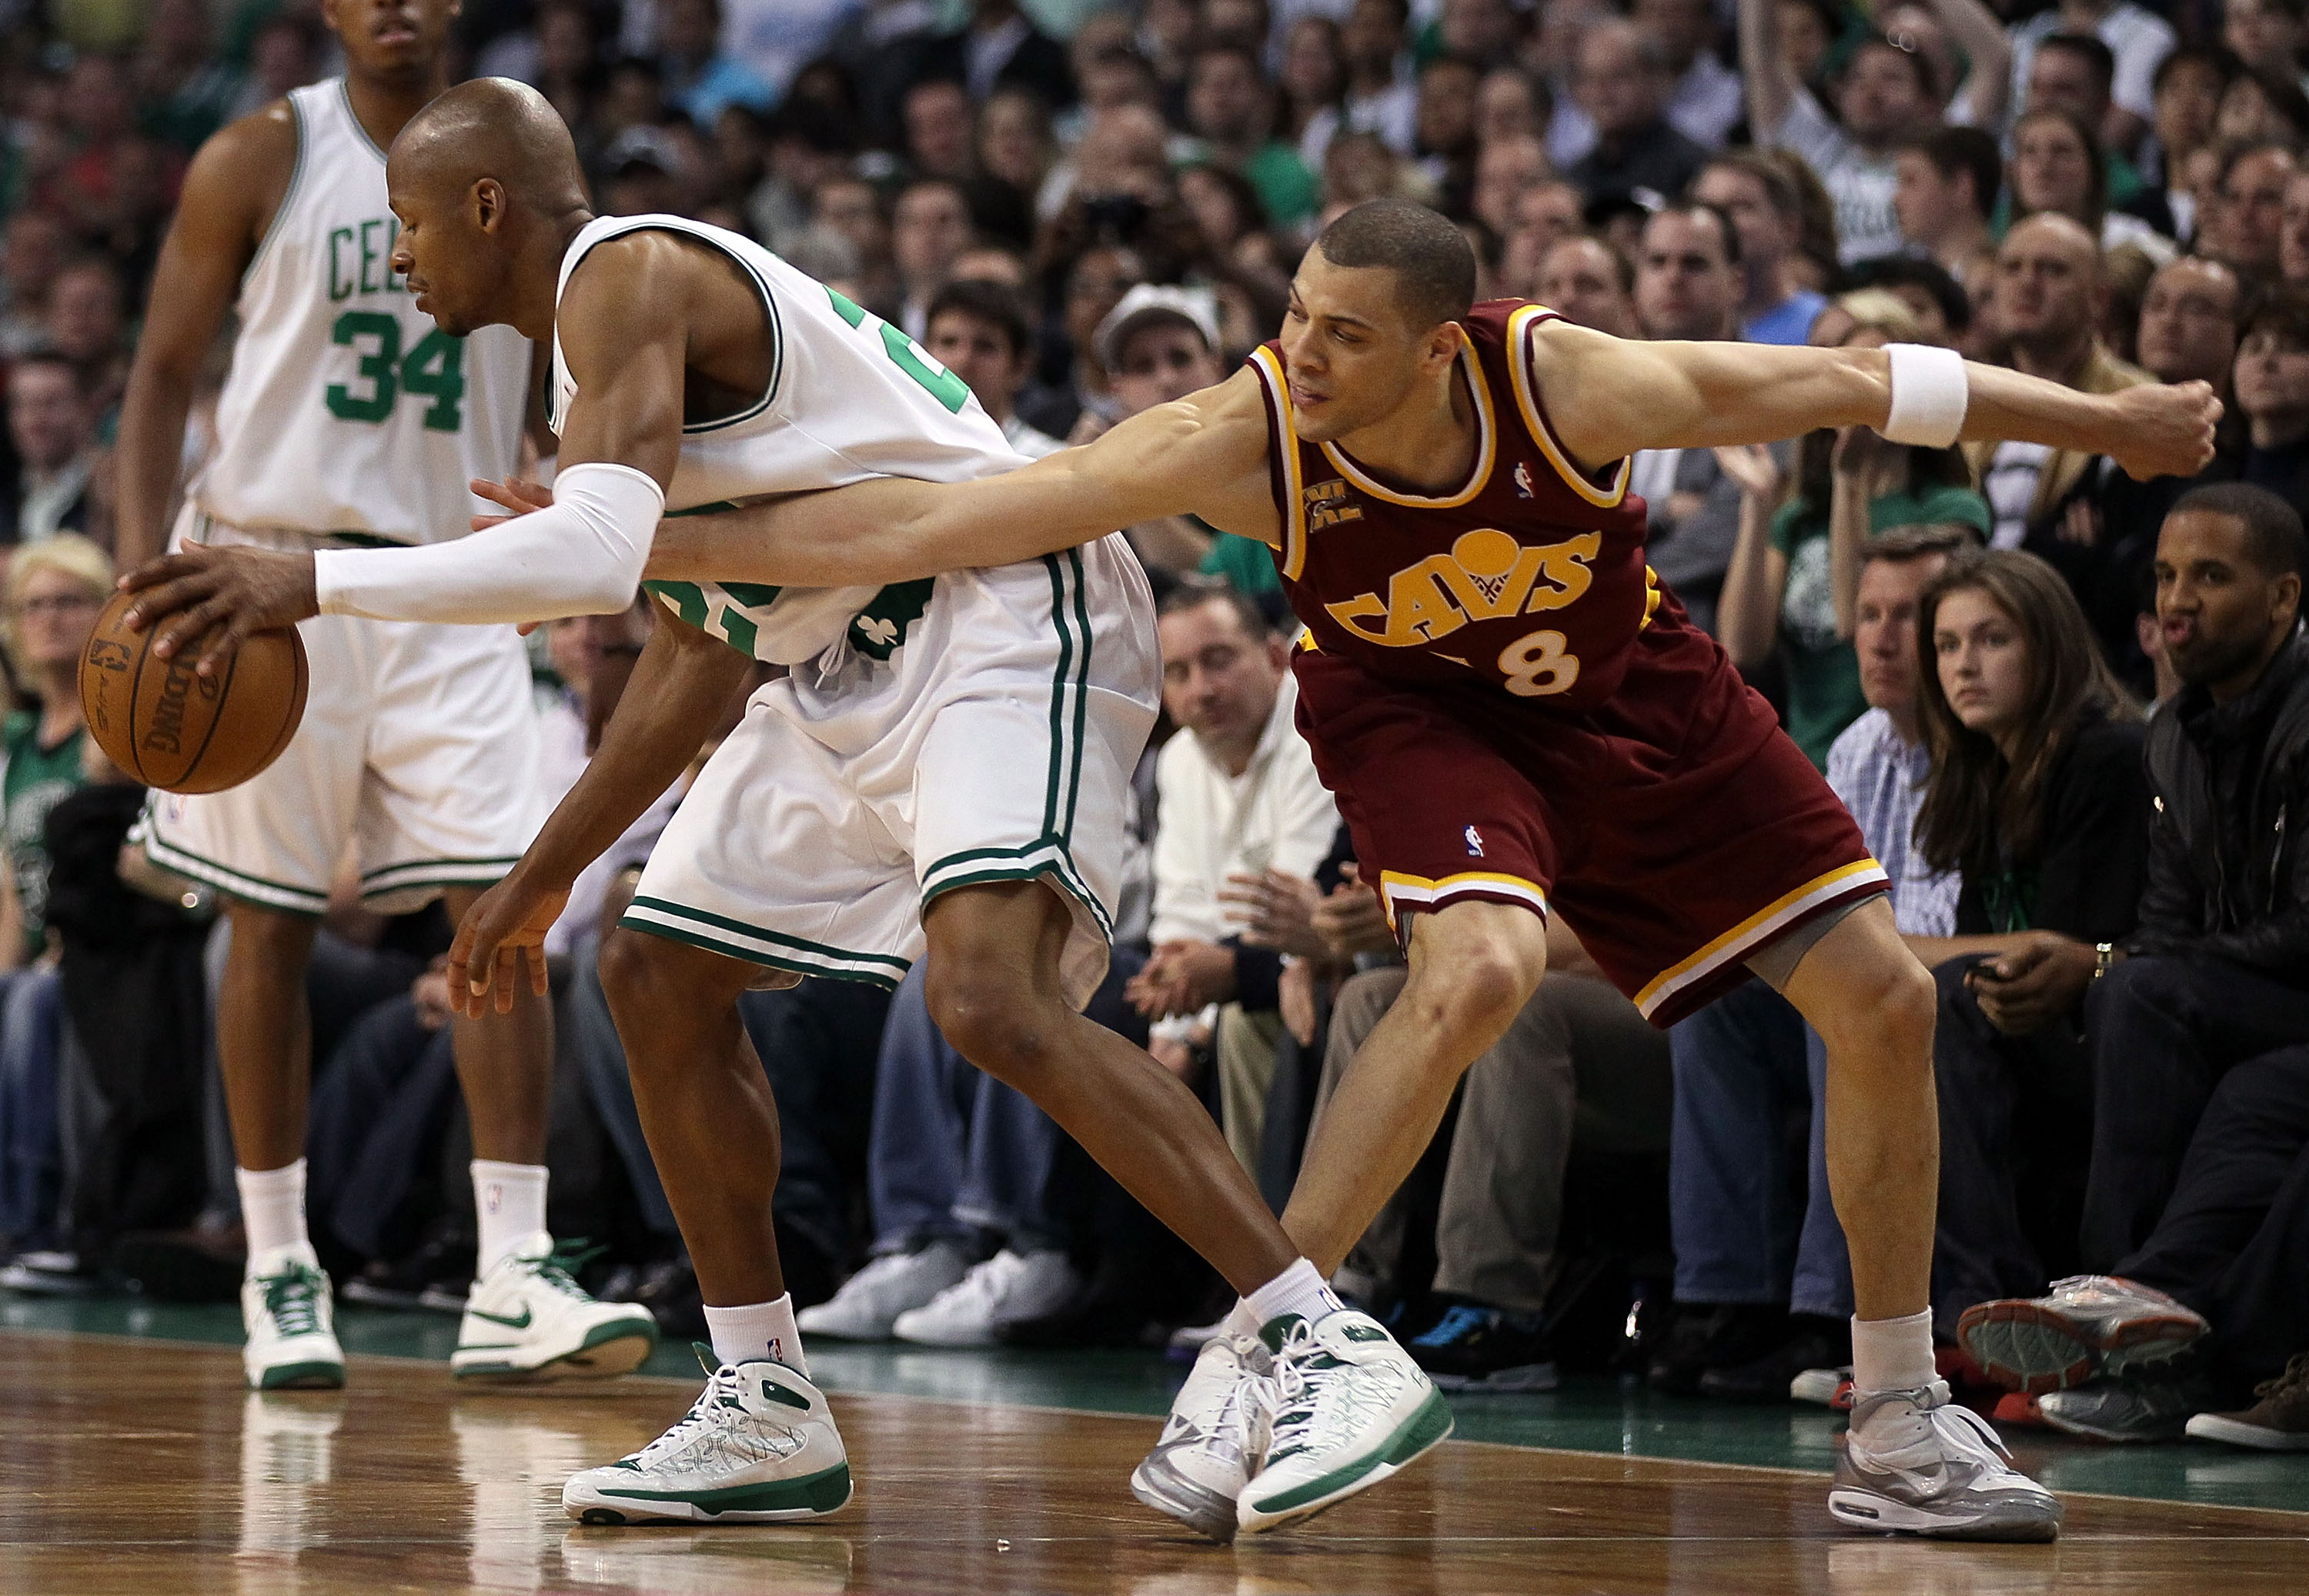 BOSTON - MAY 09:   Ray Allen #20 of the Boston Celtics is fouled by Anthony Parker #18 of the Cleveland Cavaliers during Game Four of the Eastern Conference Semifinals of the 2010 NBA playoffs at TD Garden on May 9, 2010 in Boston, Massachusetts. The Celt